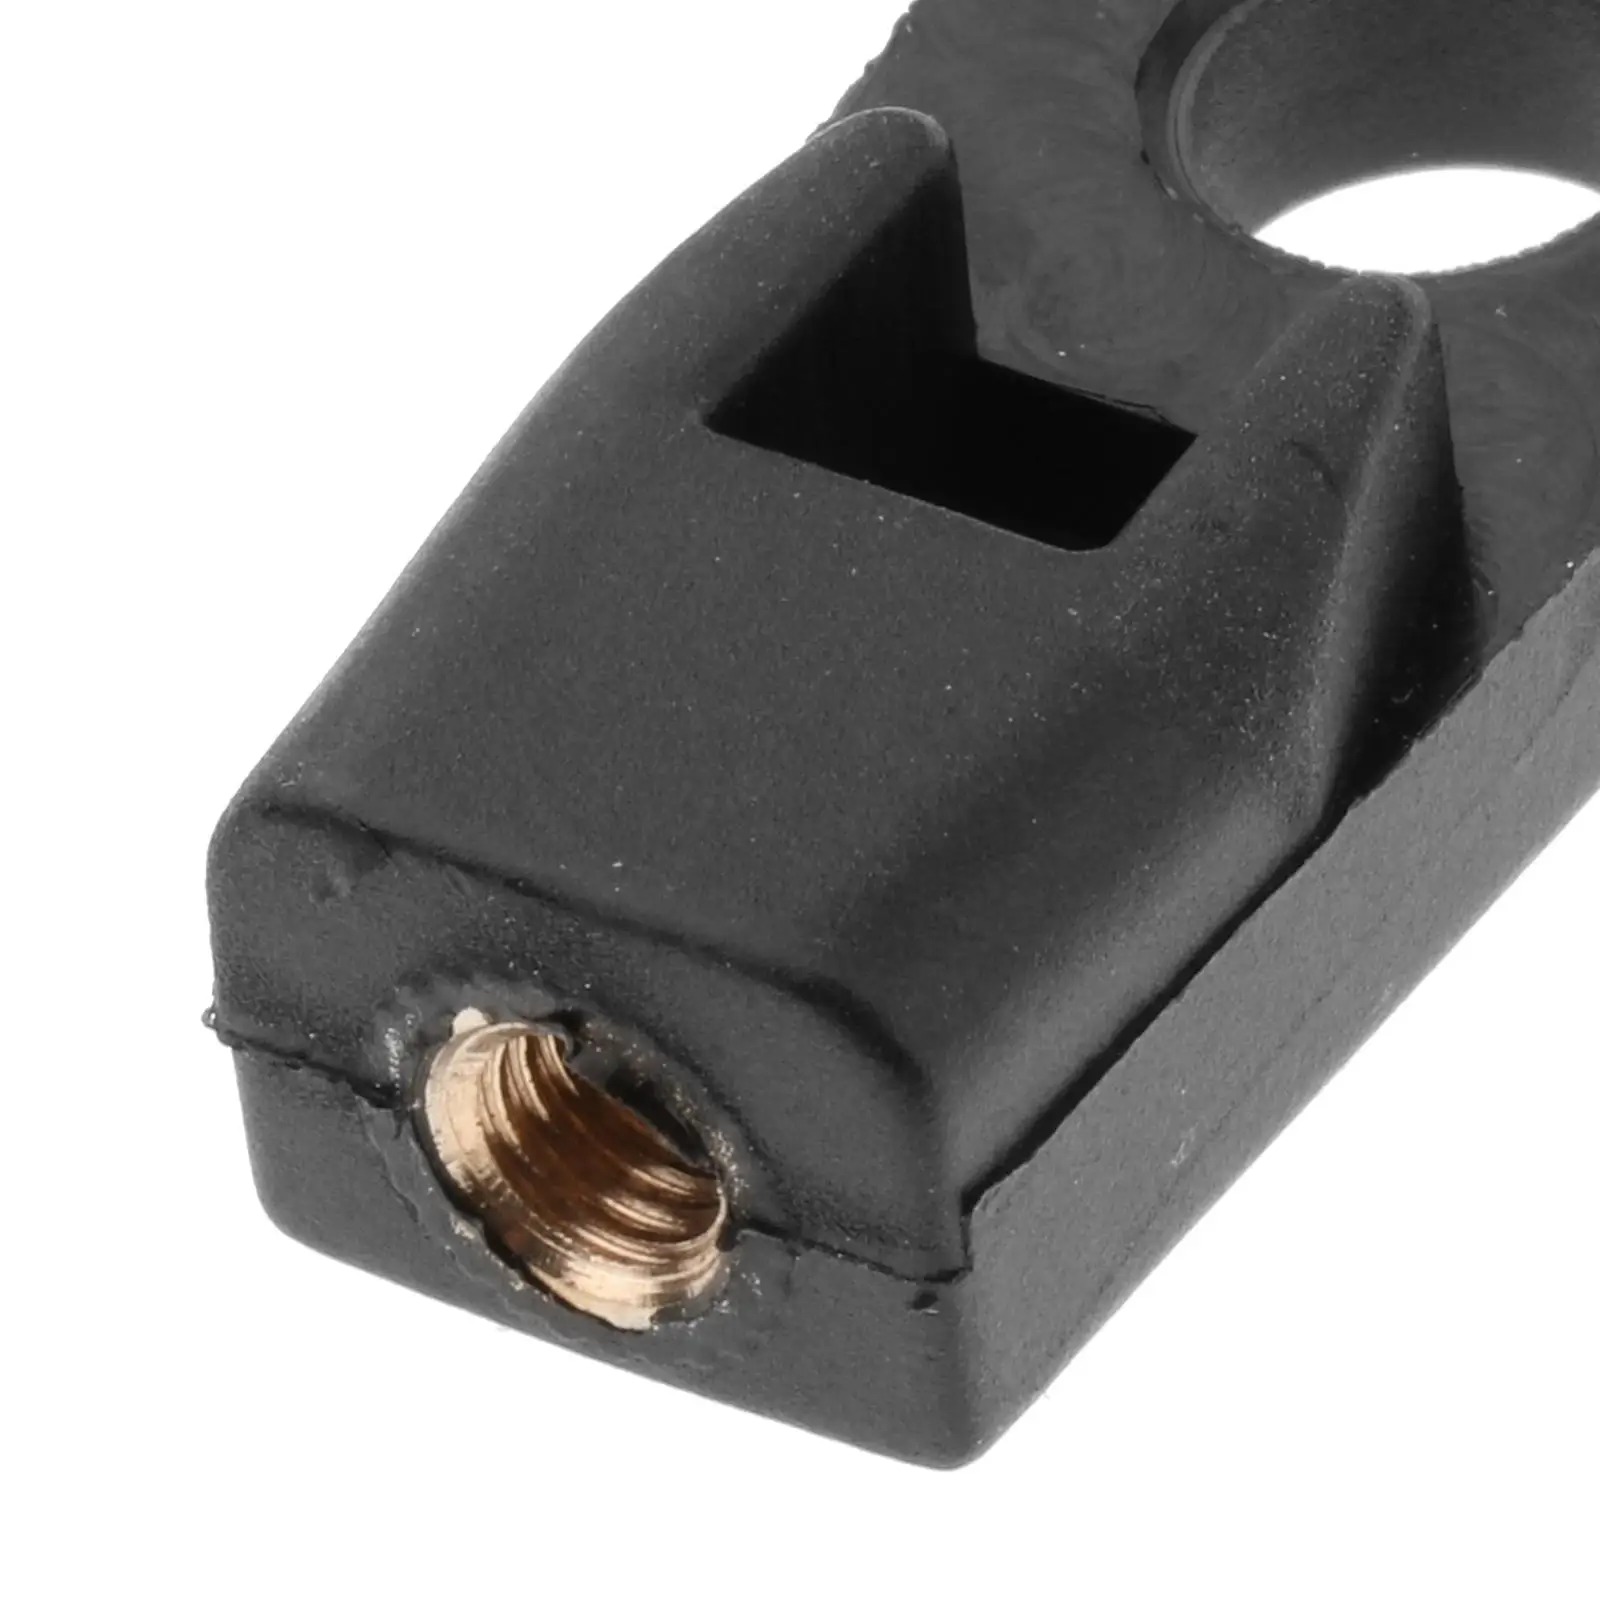 1pcs Professional Cable End Connector Repalcements Accessory Black